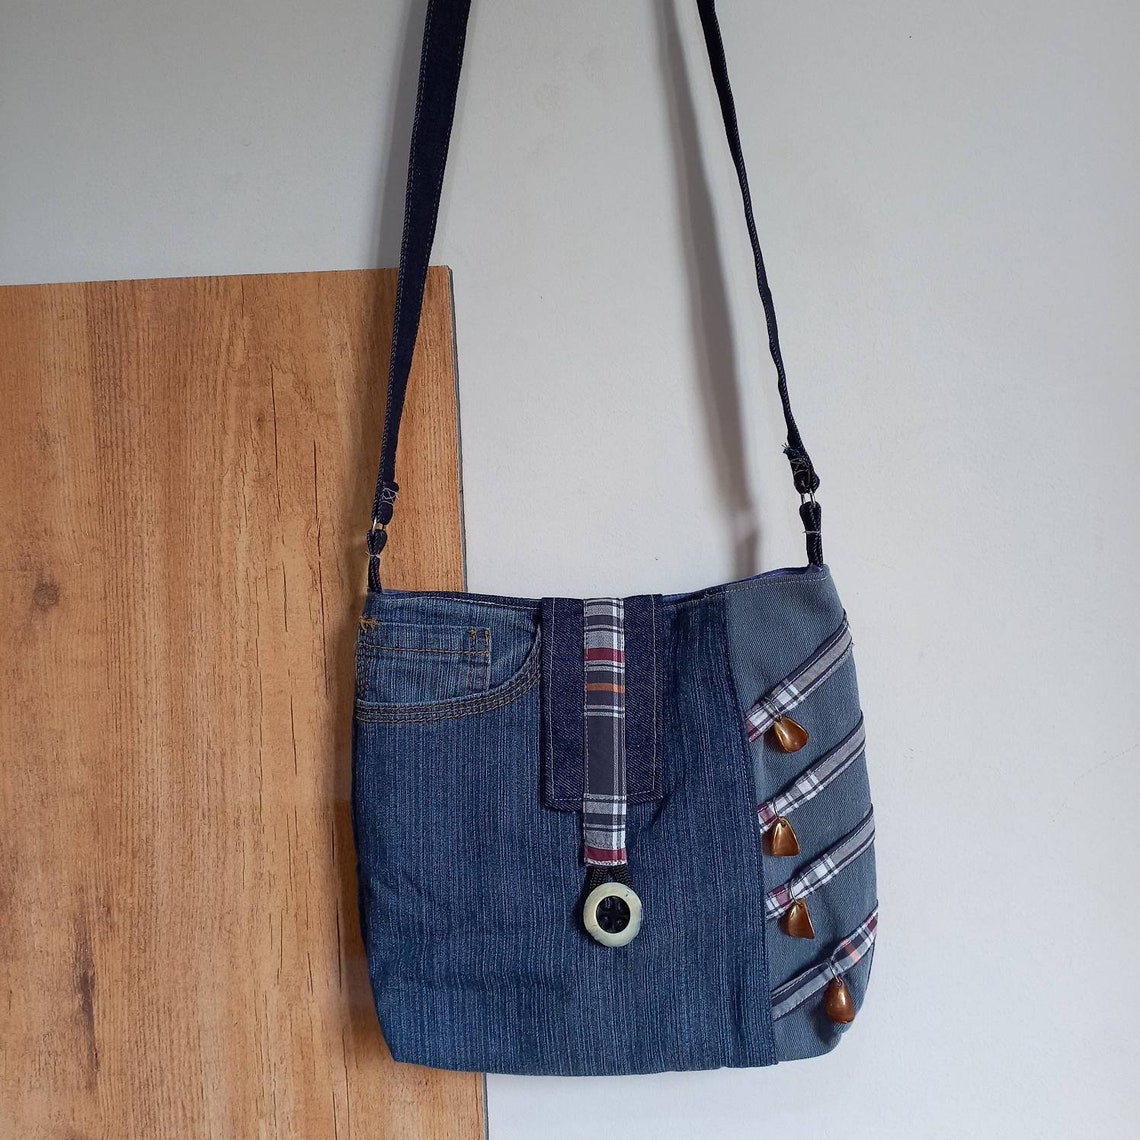 Cute Mini Patchwork Jeans Crossbody Bag With an Adjustable Cross Body ...